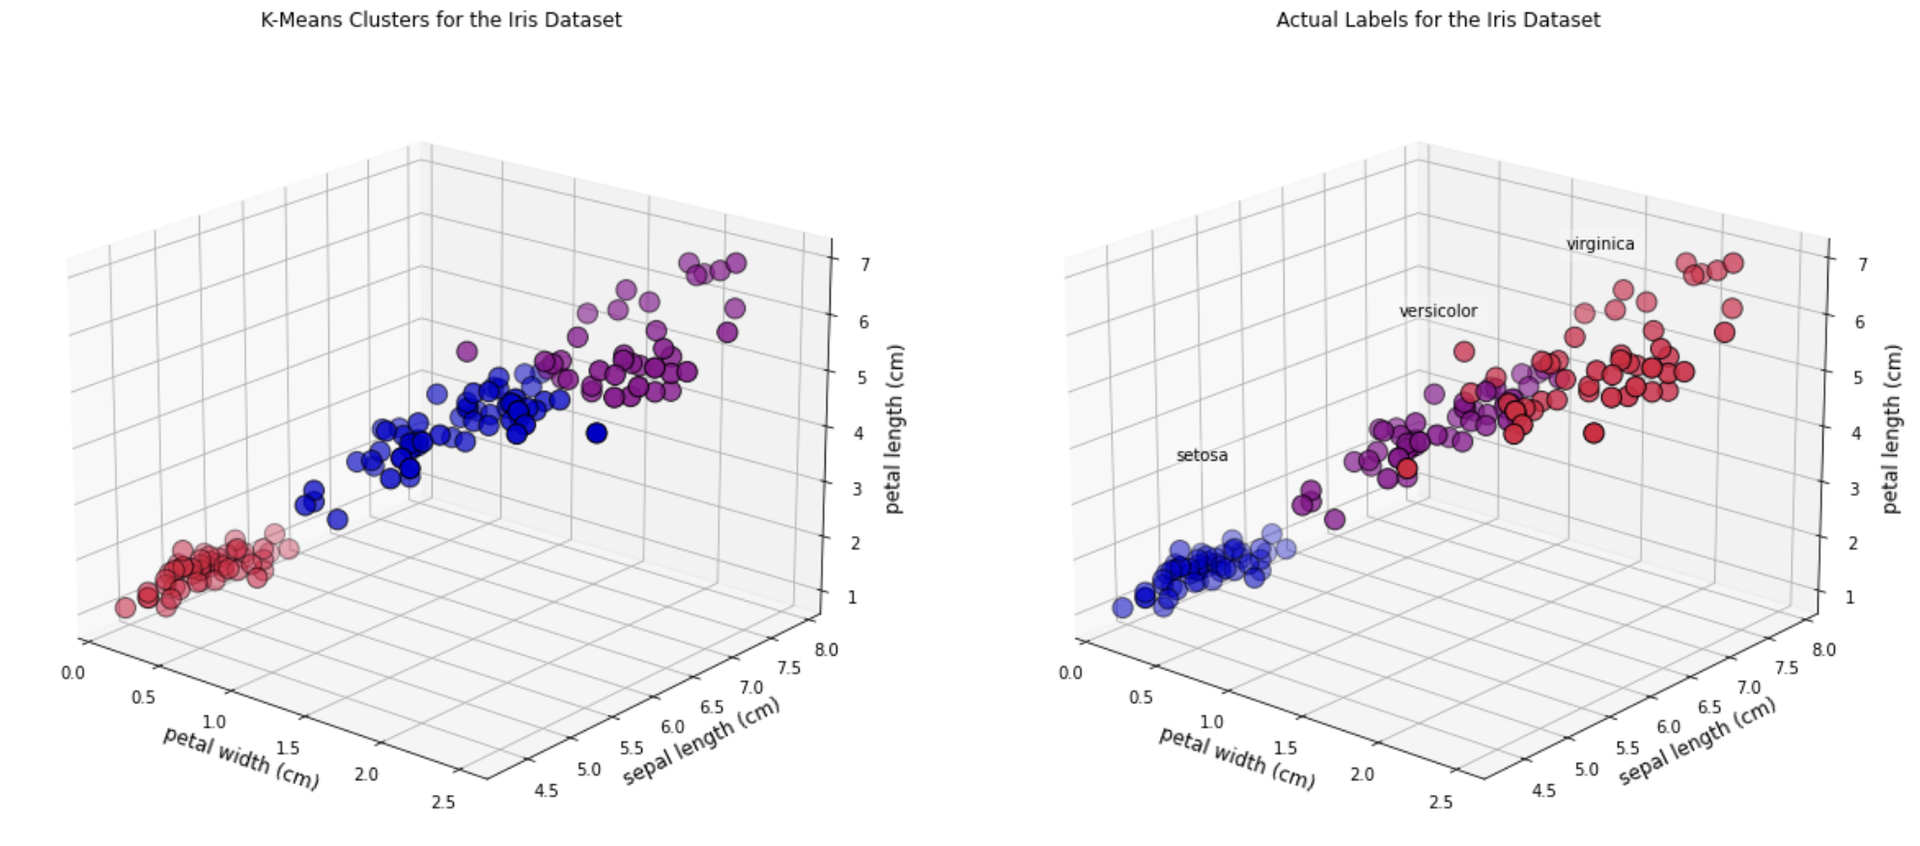 K Means clusters for iris data set vs the actual labels in the dataset